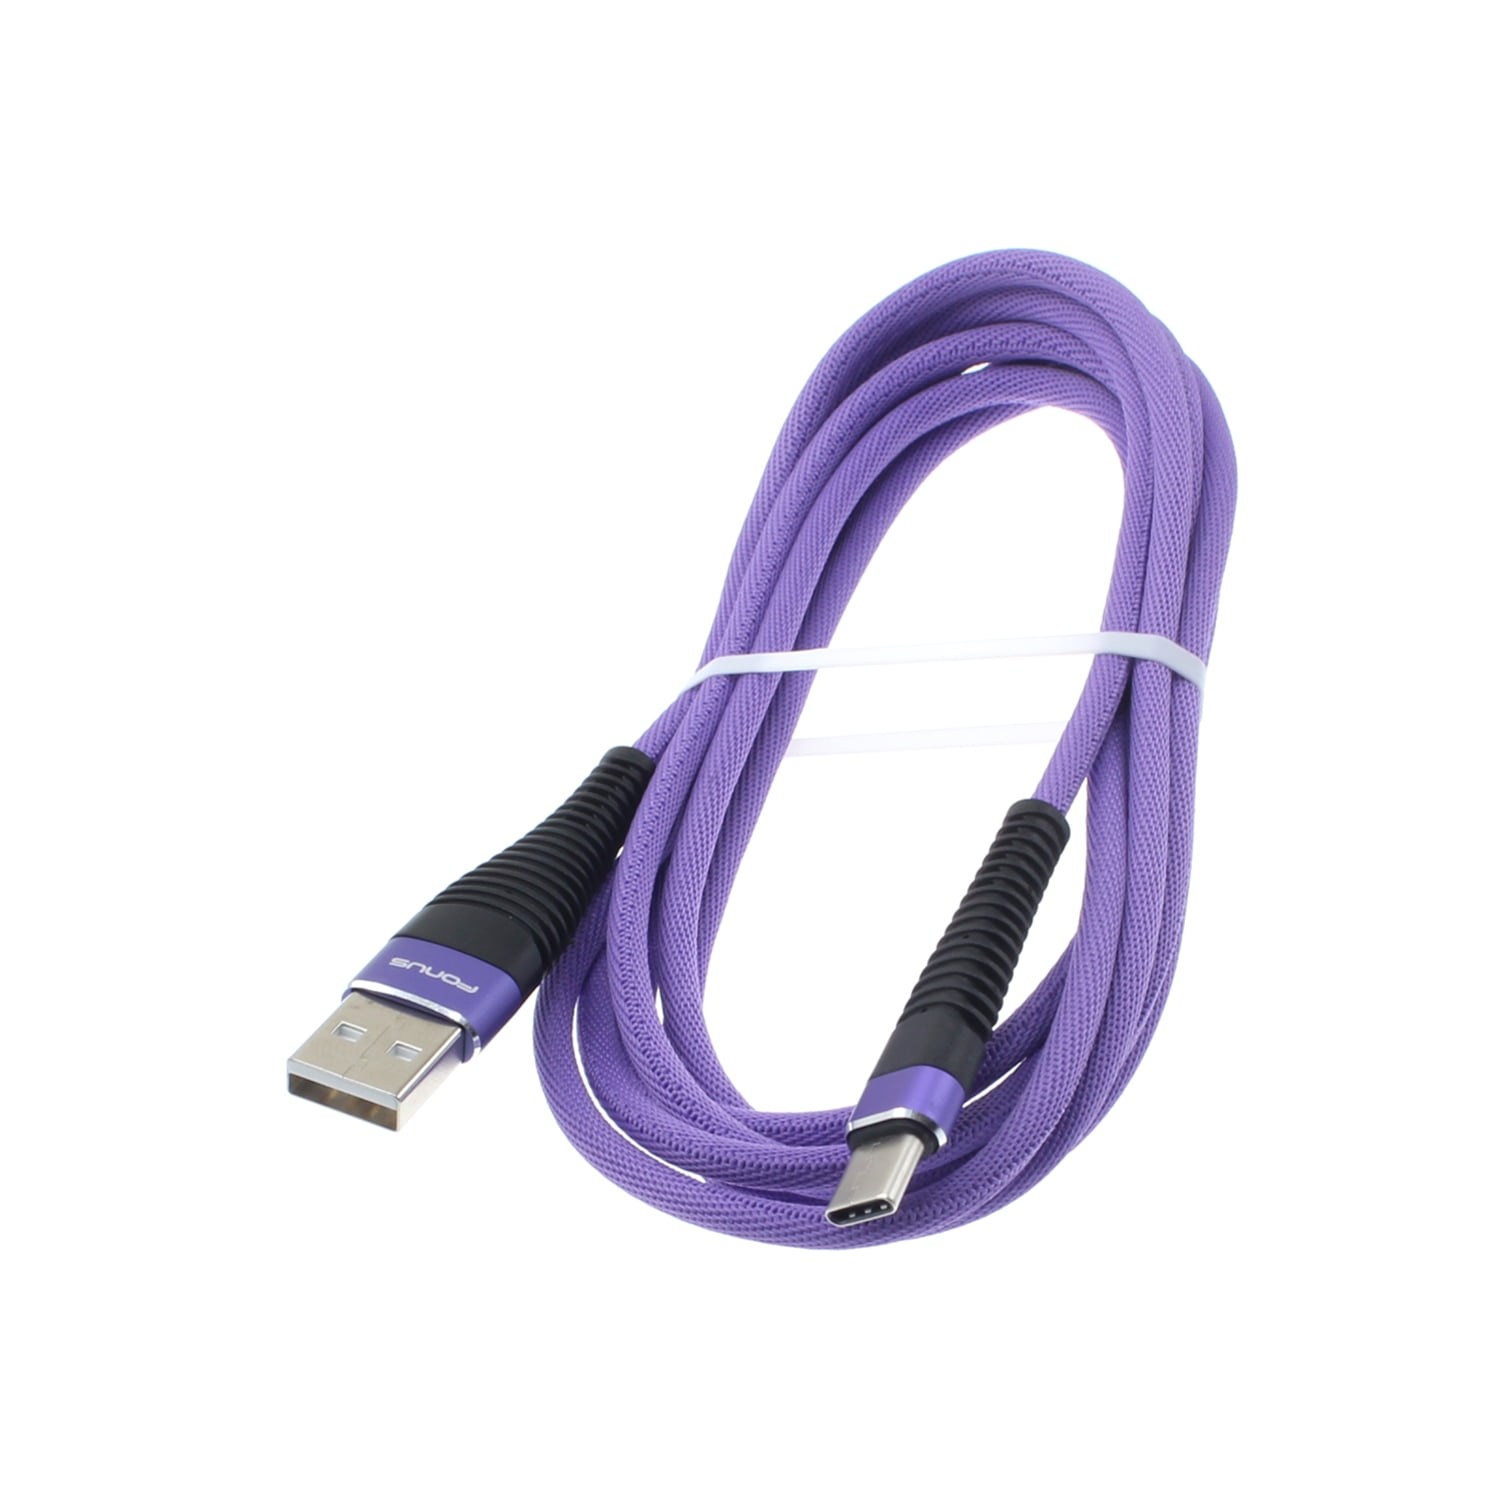 Purple 10ft Extra Long USB-C Cable for Samsung Galaxy A01 A10e A11 A21 A20 A50 A51 A71, S10/S20/S21/Plus/Ultra - Type-C Fast Charger Power Cord for Galaxy A02s A10e A10s A12 A20 A32 A42 A52 A72 5G